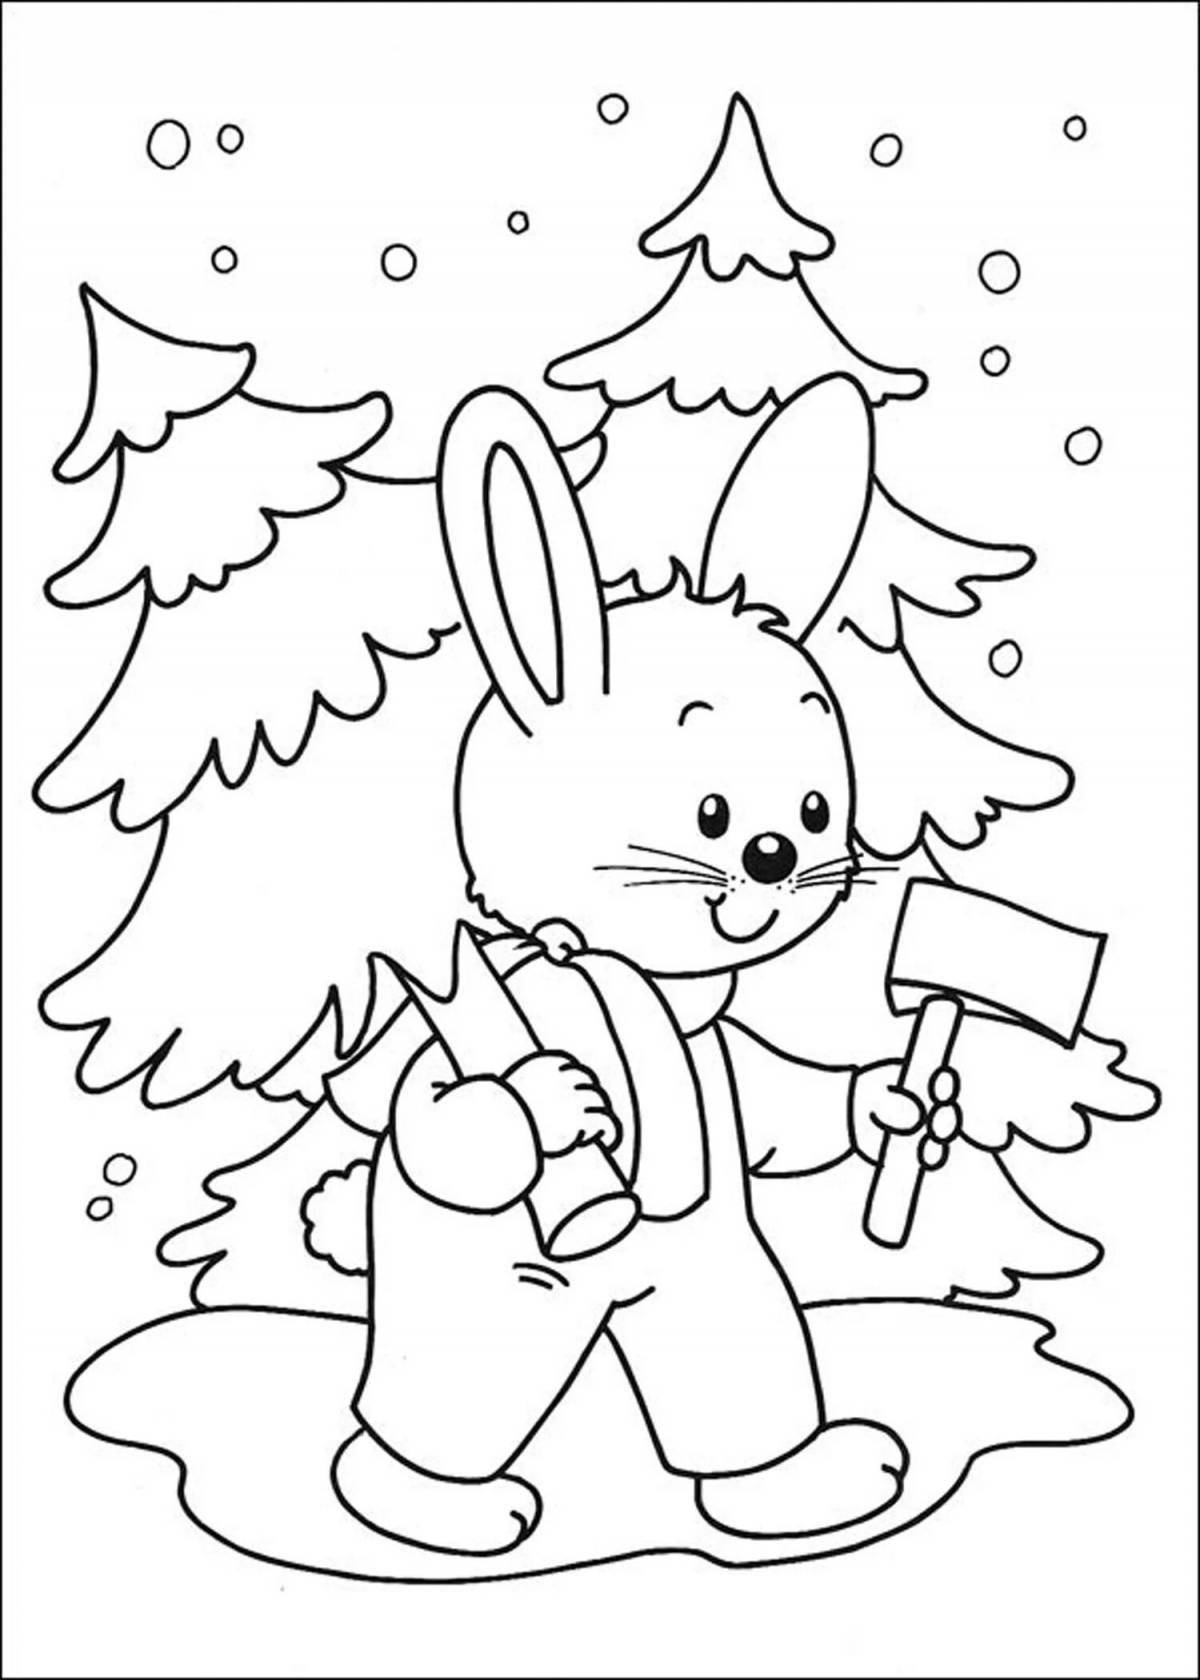 A fascinating winter Christmas coloring book